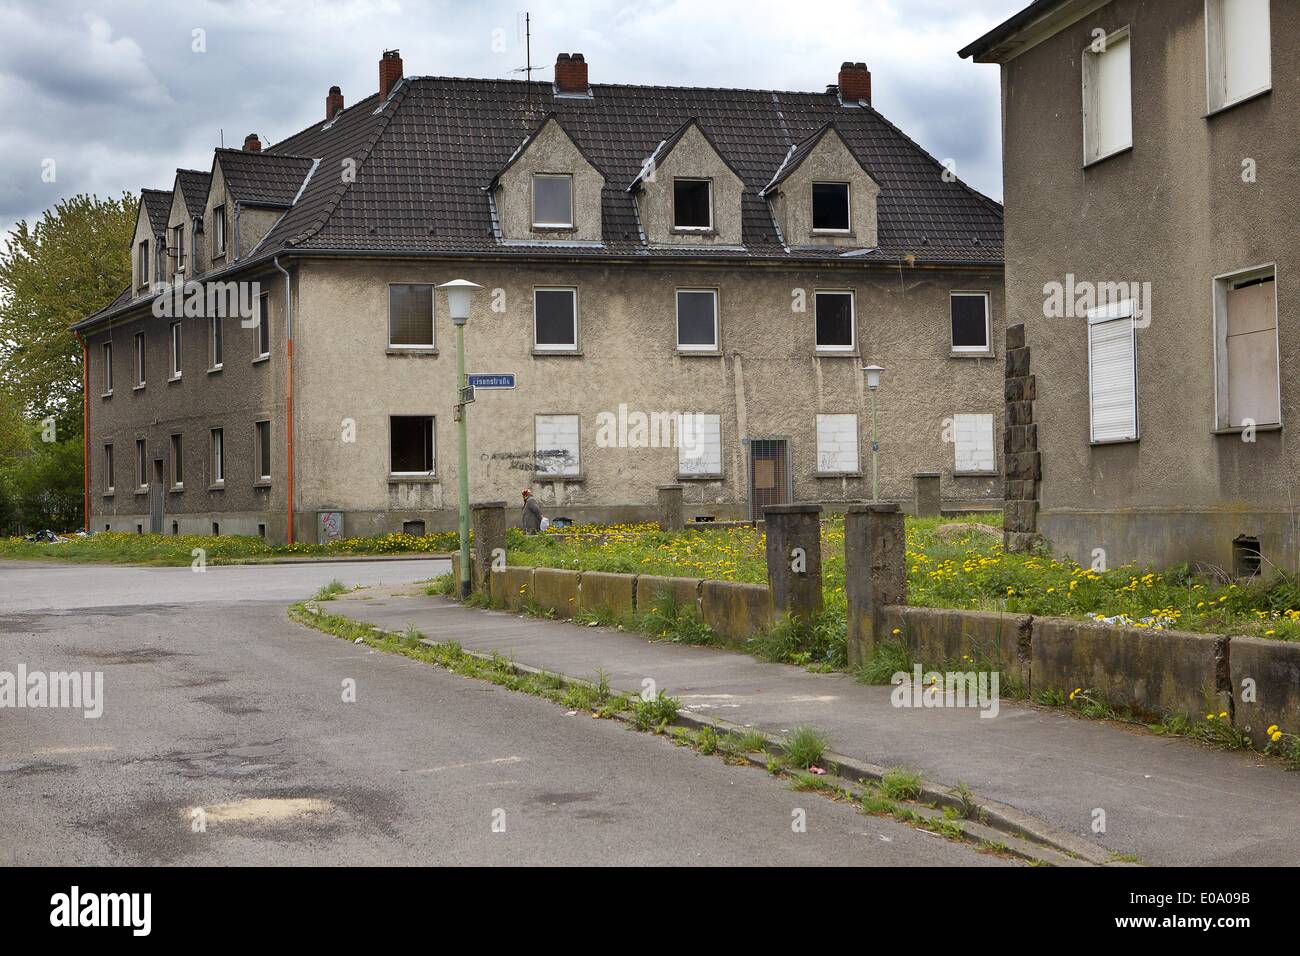 historic homes of mineworker families from 1912, pictured 13.05.2013. Since 15 years these houses are empty due to the closing of the coal-mines. Stock Photo